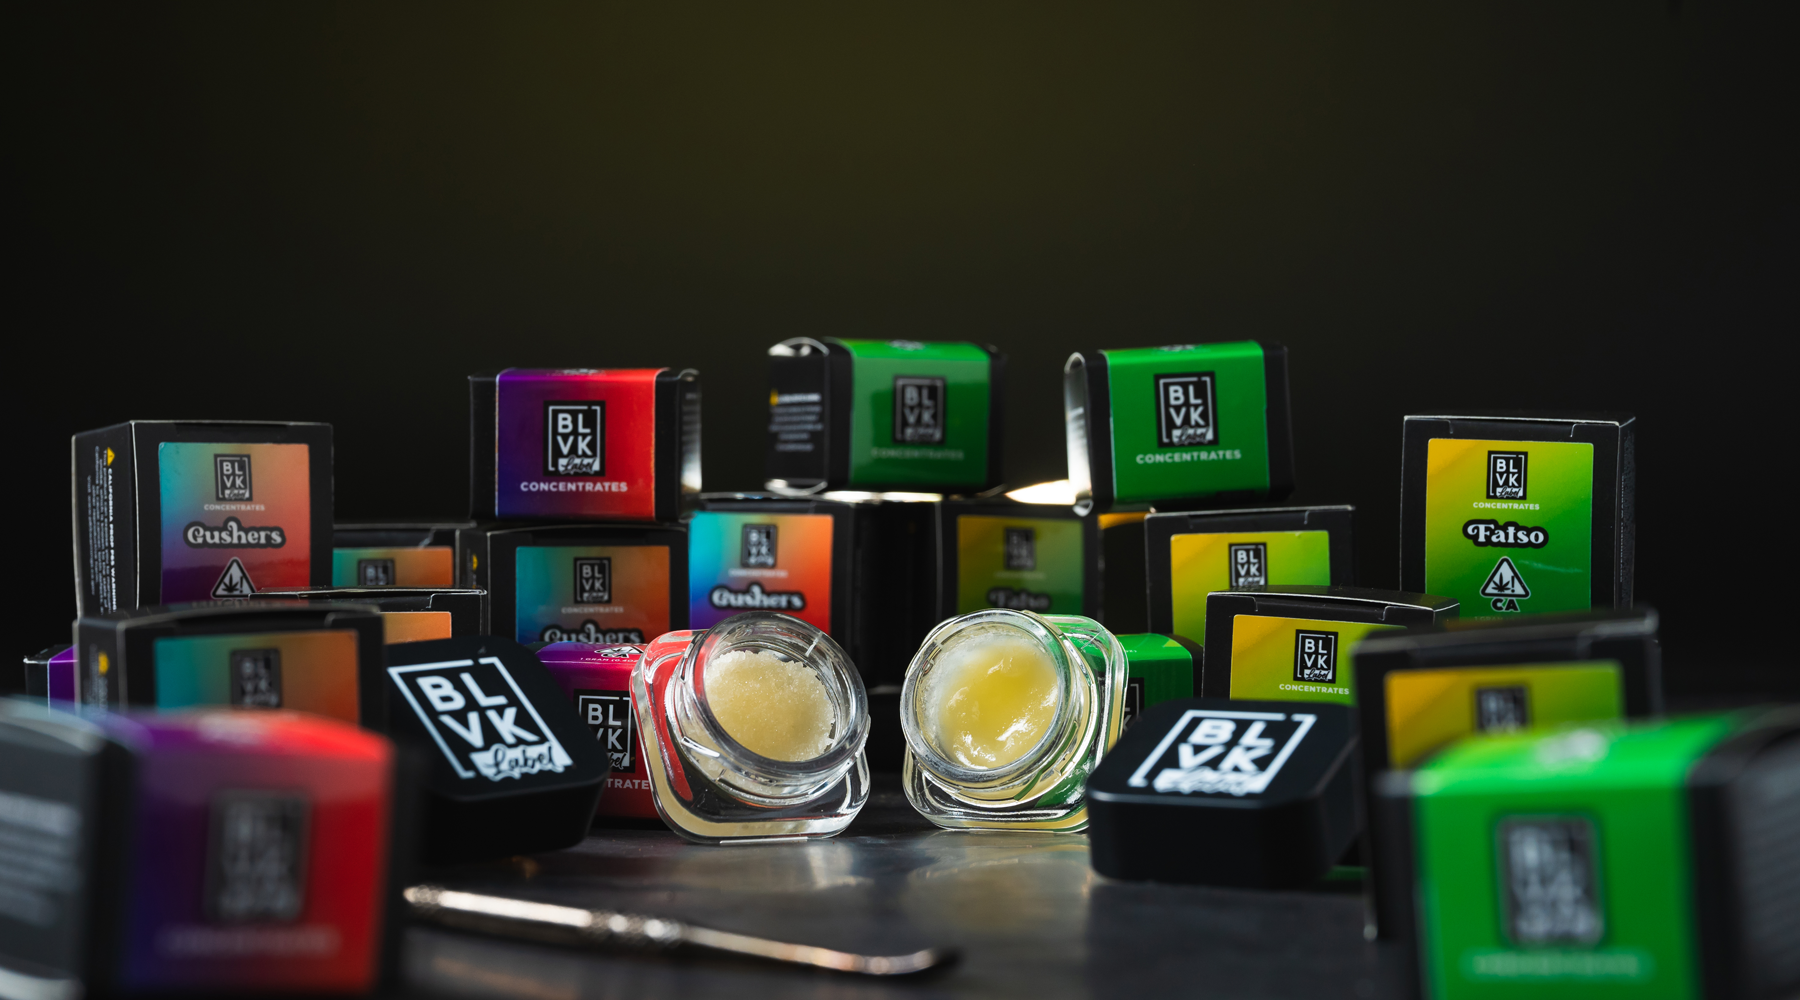 Meet the All-New BLVK Label Concentrates!